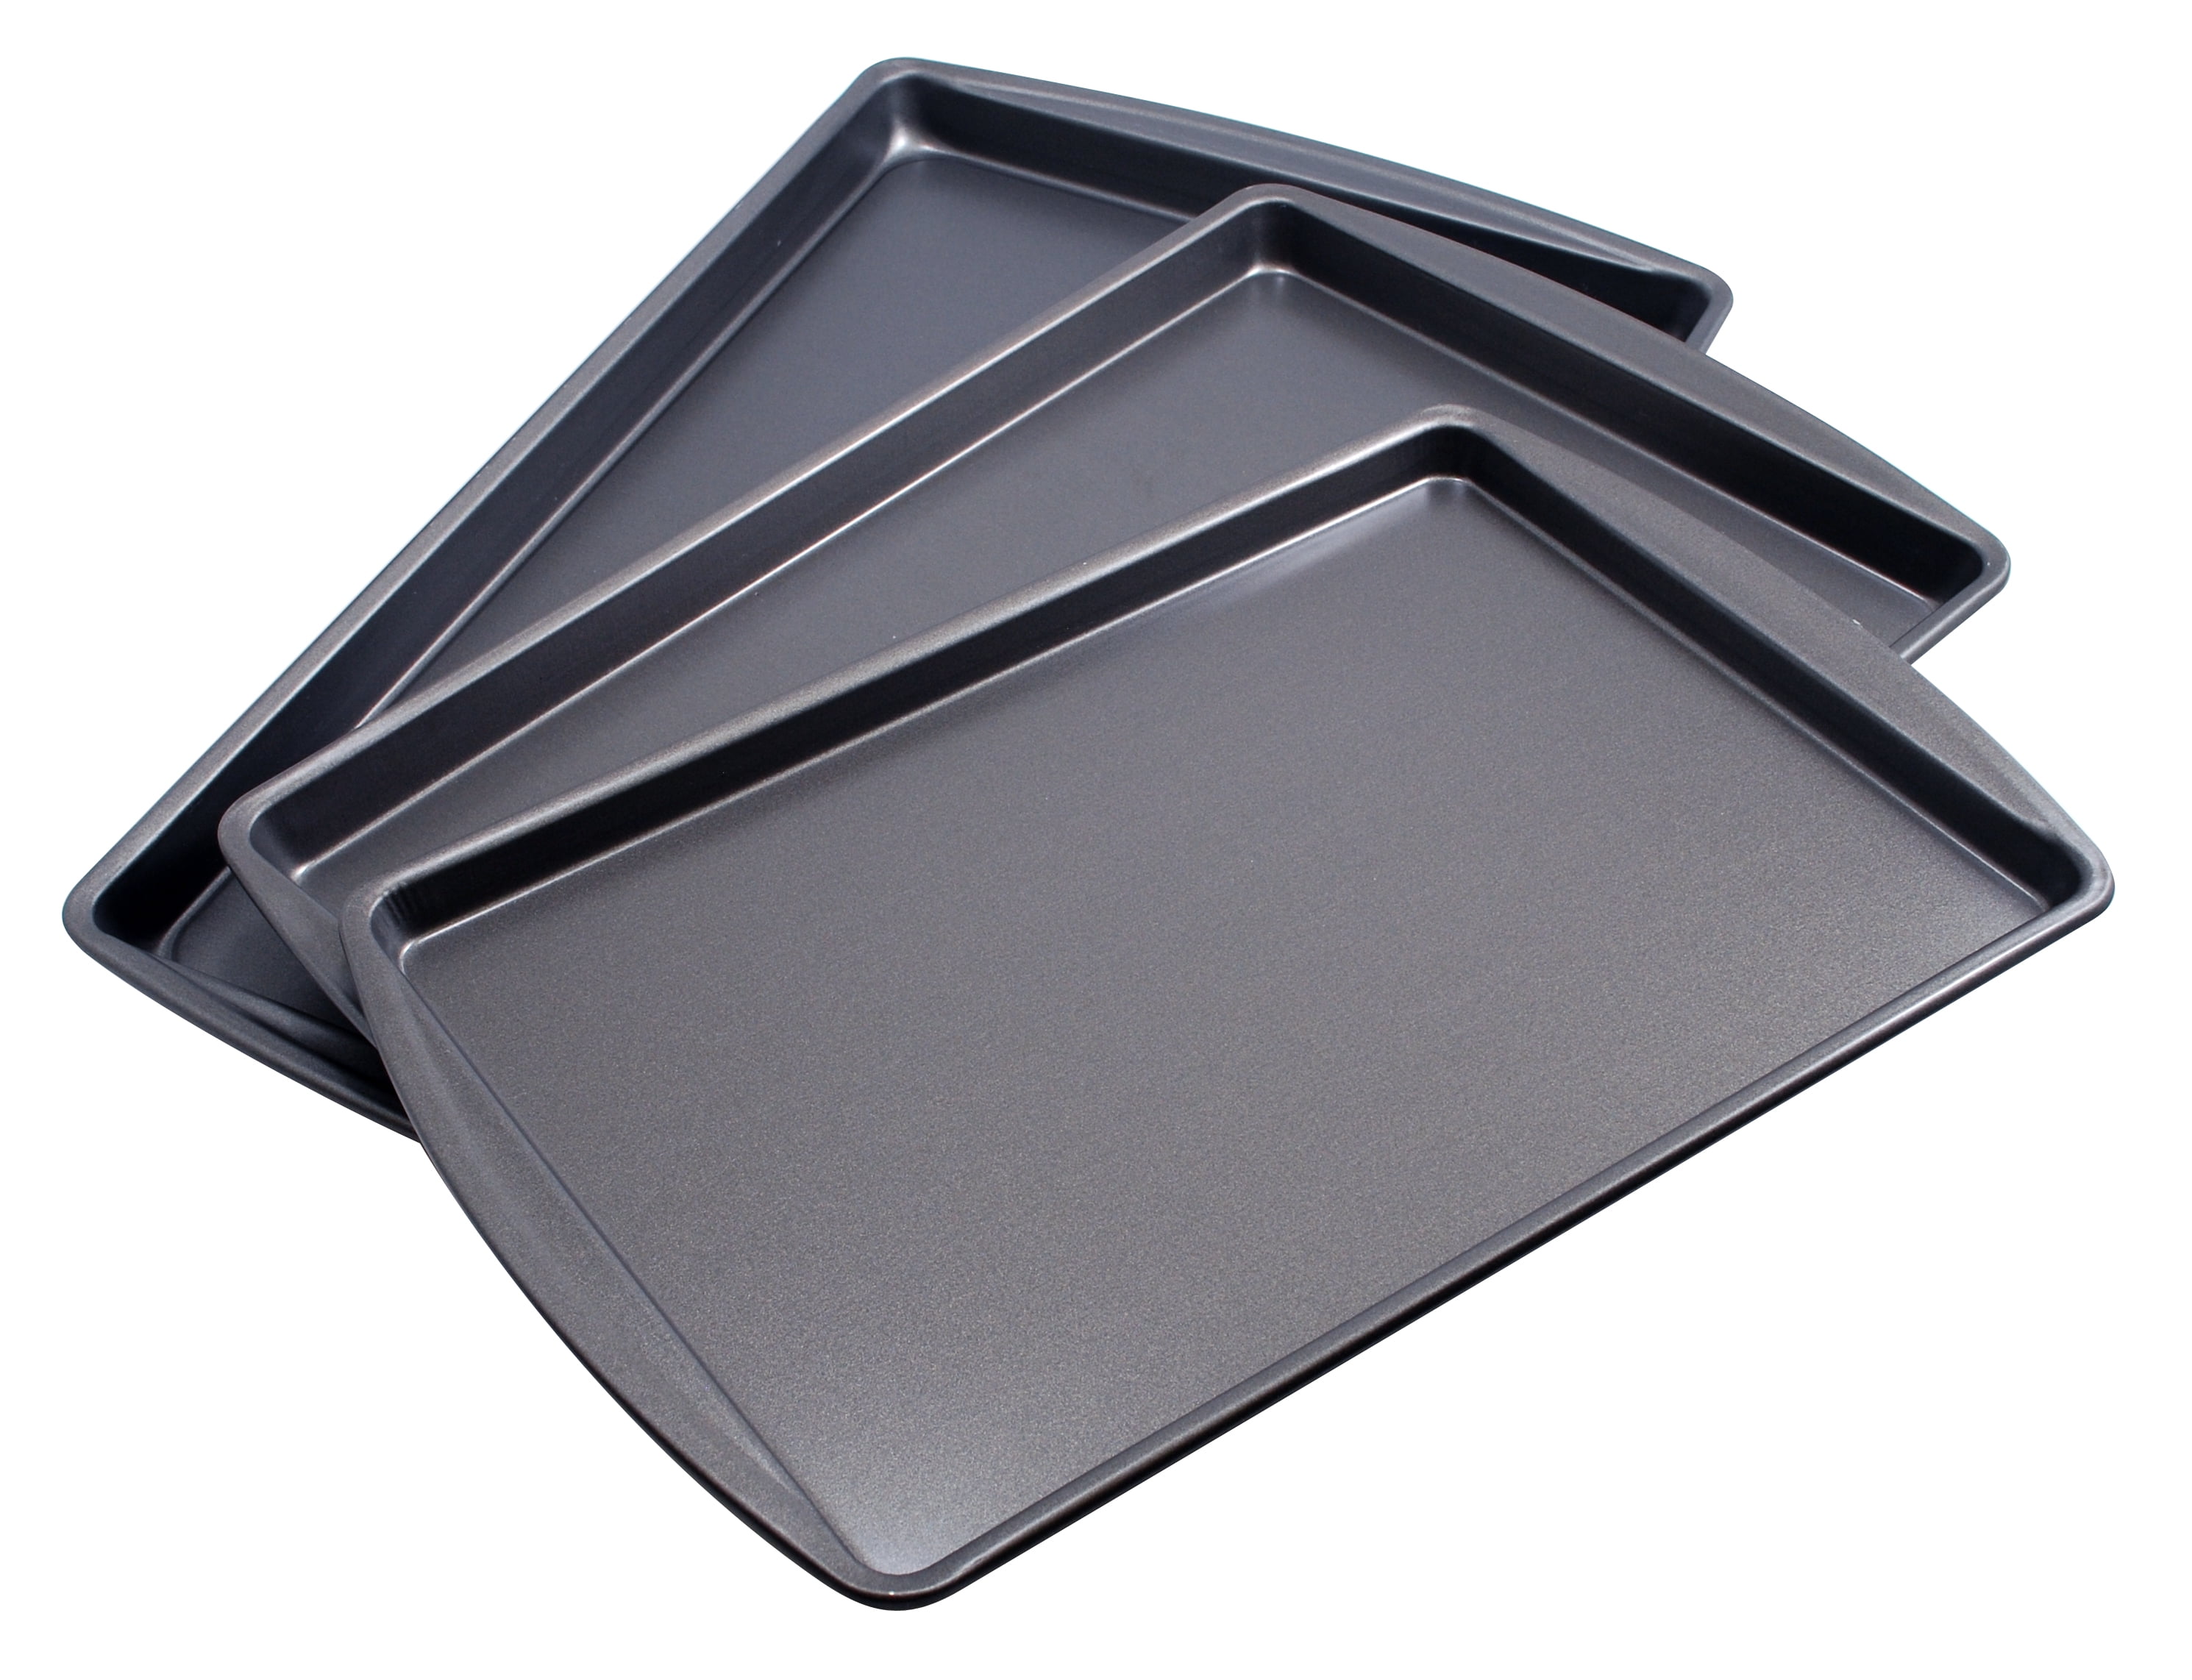 Nifty Cookie & Baking Sheets (Set of 3) – Non-Stick Coated Steel,  Dishwasher Safe, Oven Safe up to 450 Degrees, includes Large/Med/Small Pans